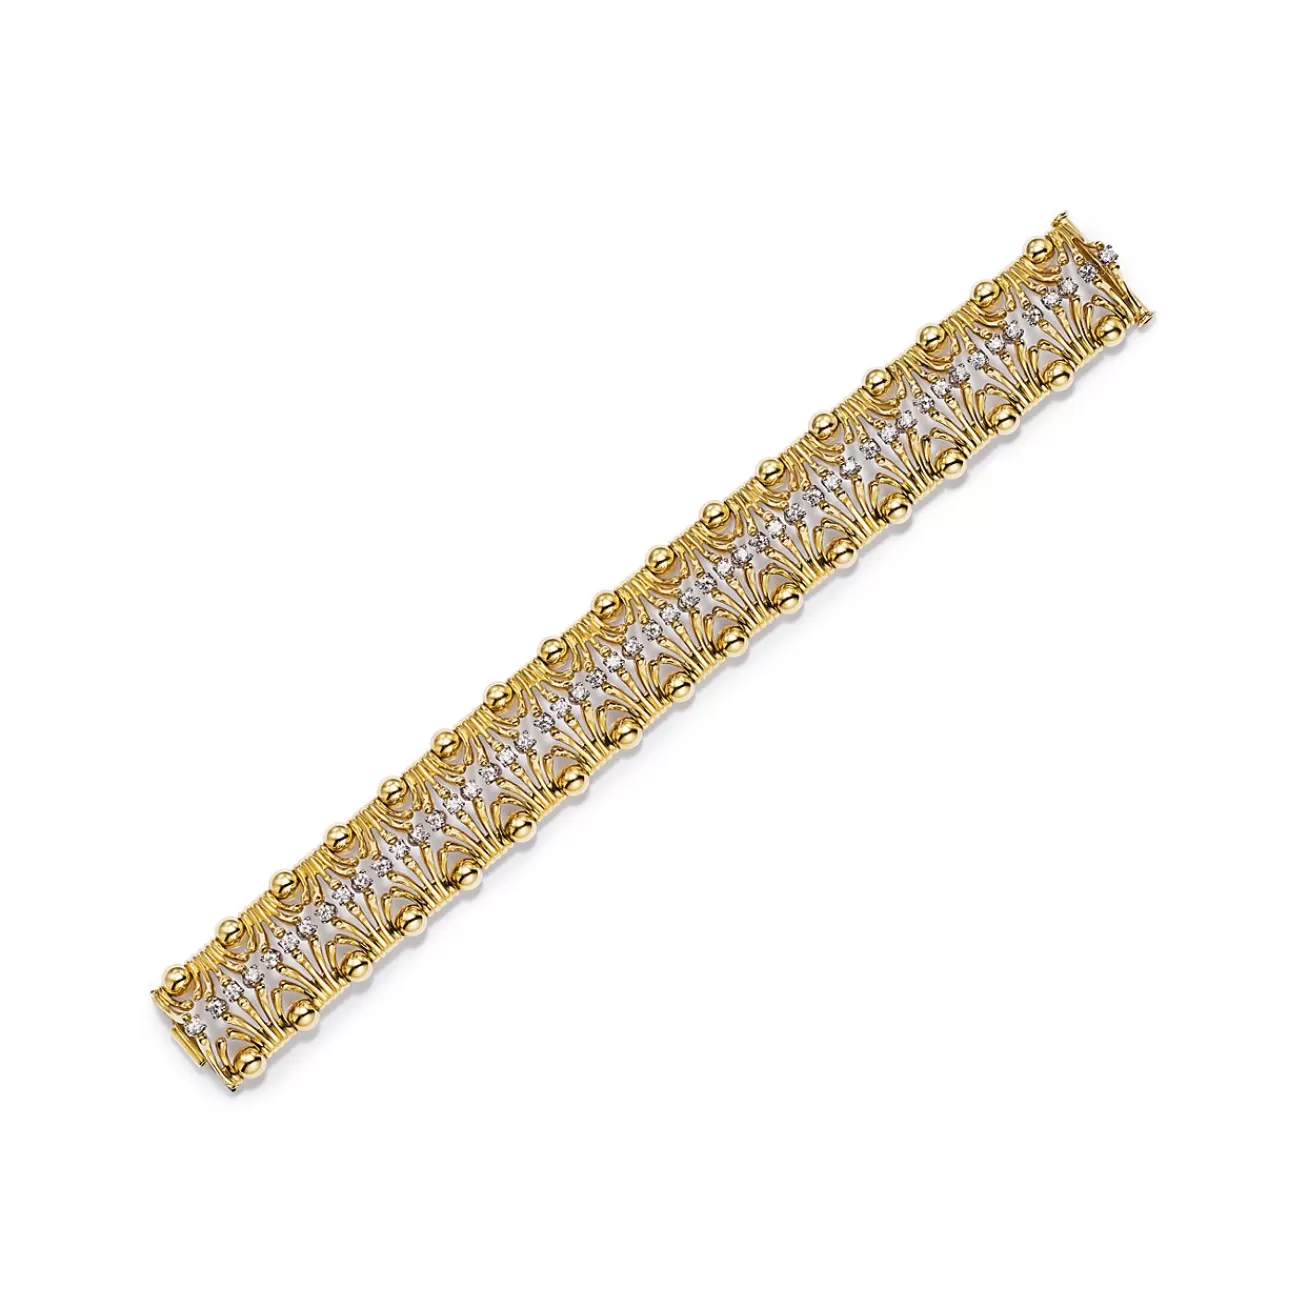 Tiffany & Co. Bracelet in Yellow Gold and Platinum with Diamonds | ^ Bracelets | Gold Jewelry